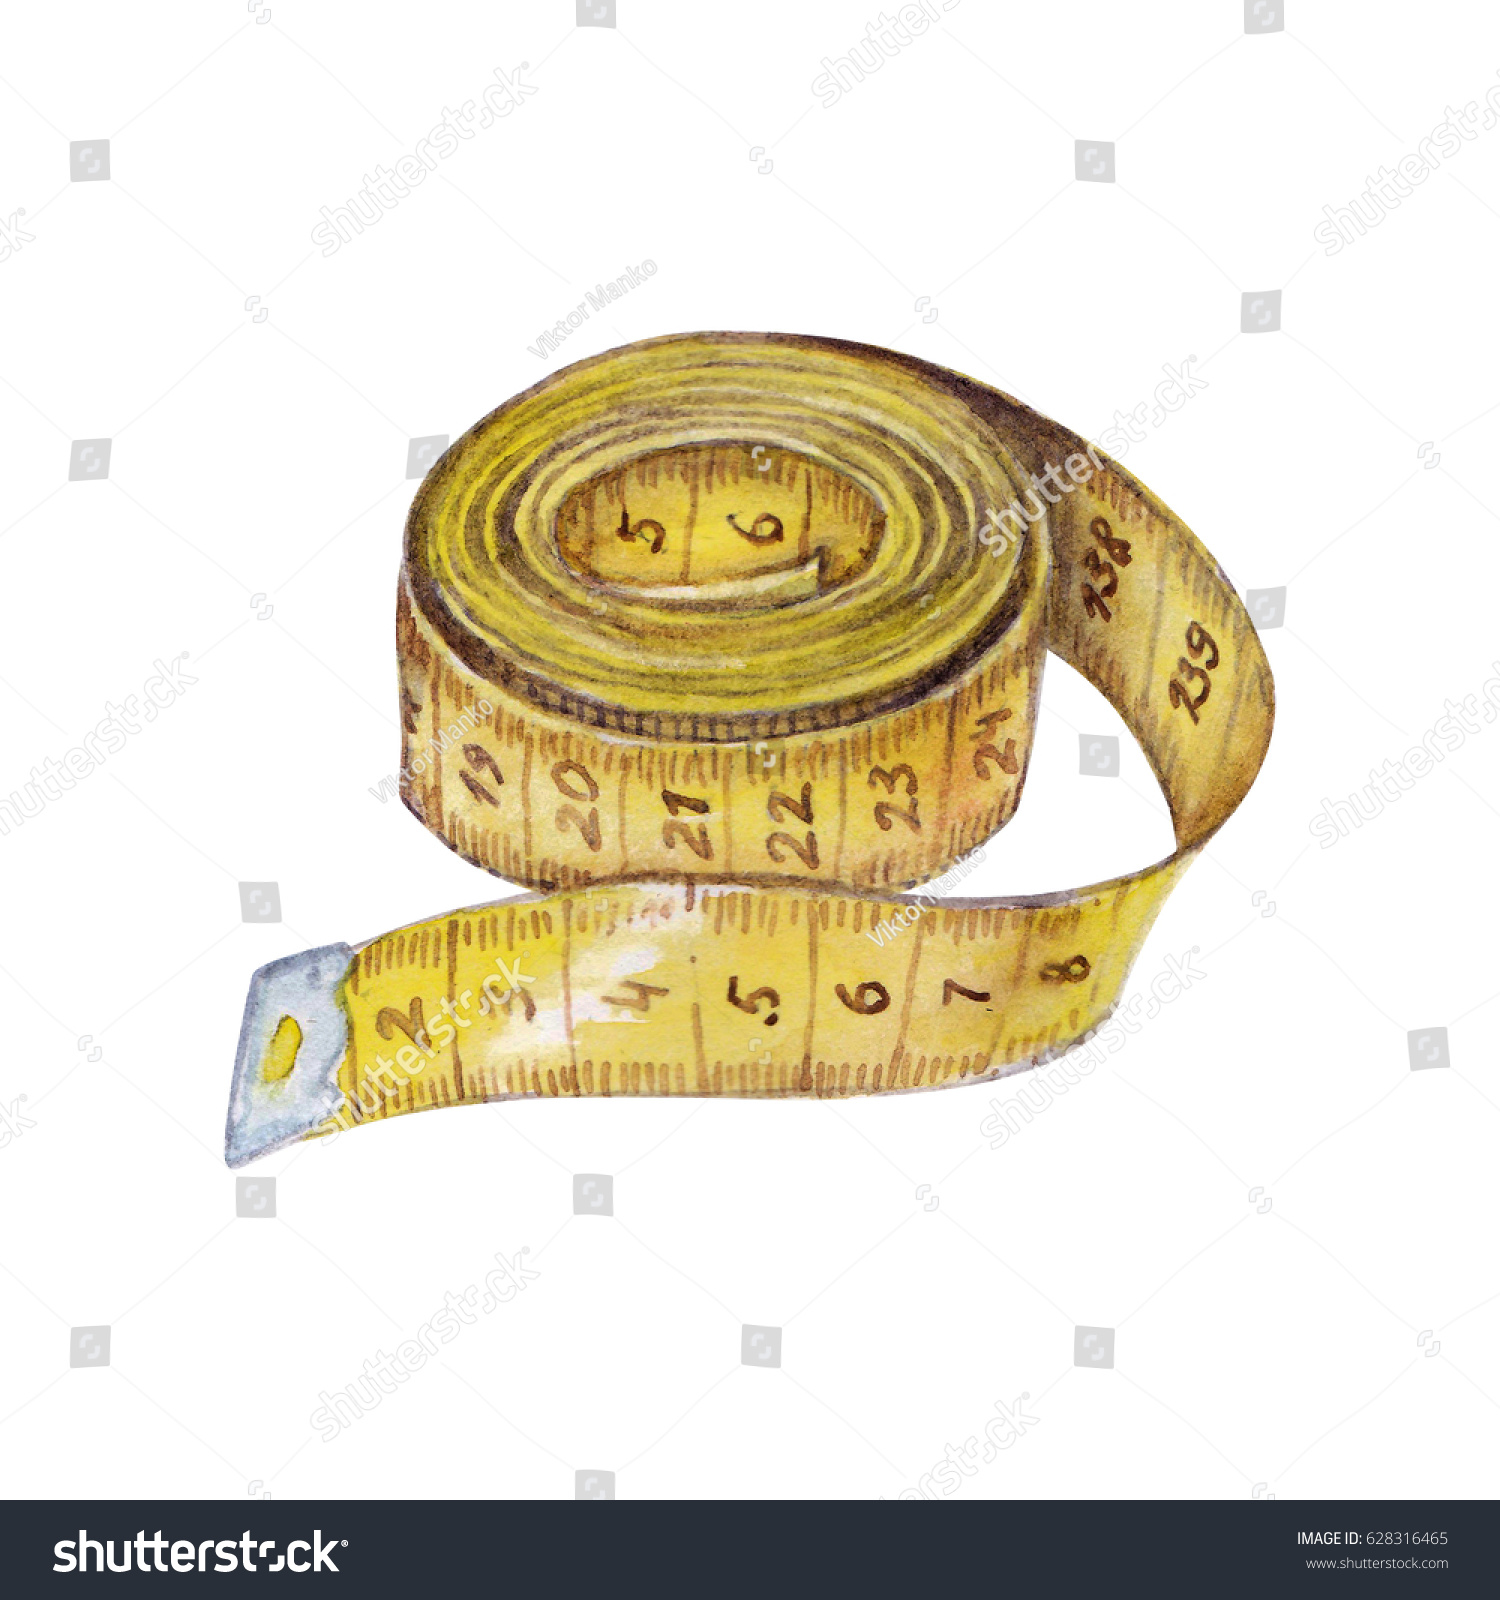 Download Watercolor Yellow Sewing Tape Measure On Stock Illustration 628316465 PSD Mockup Templates